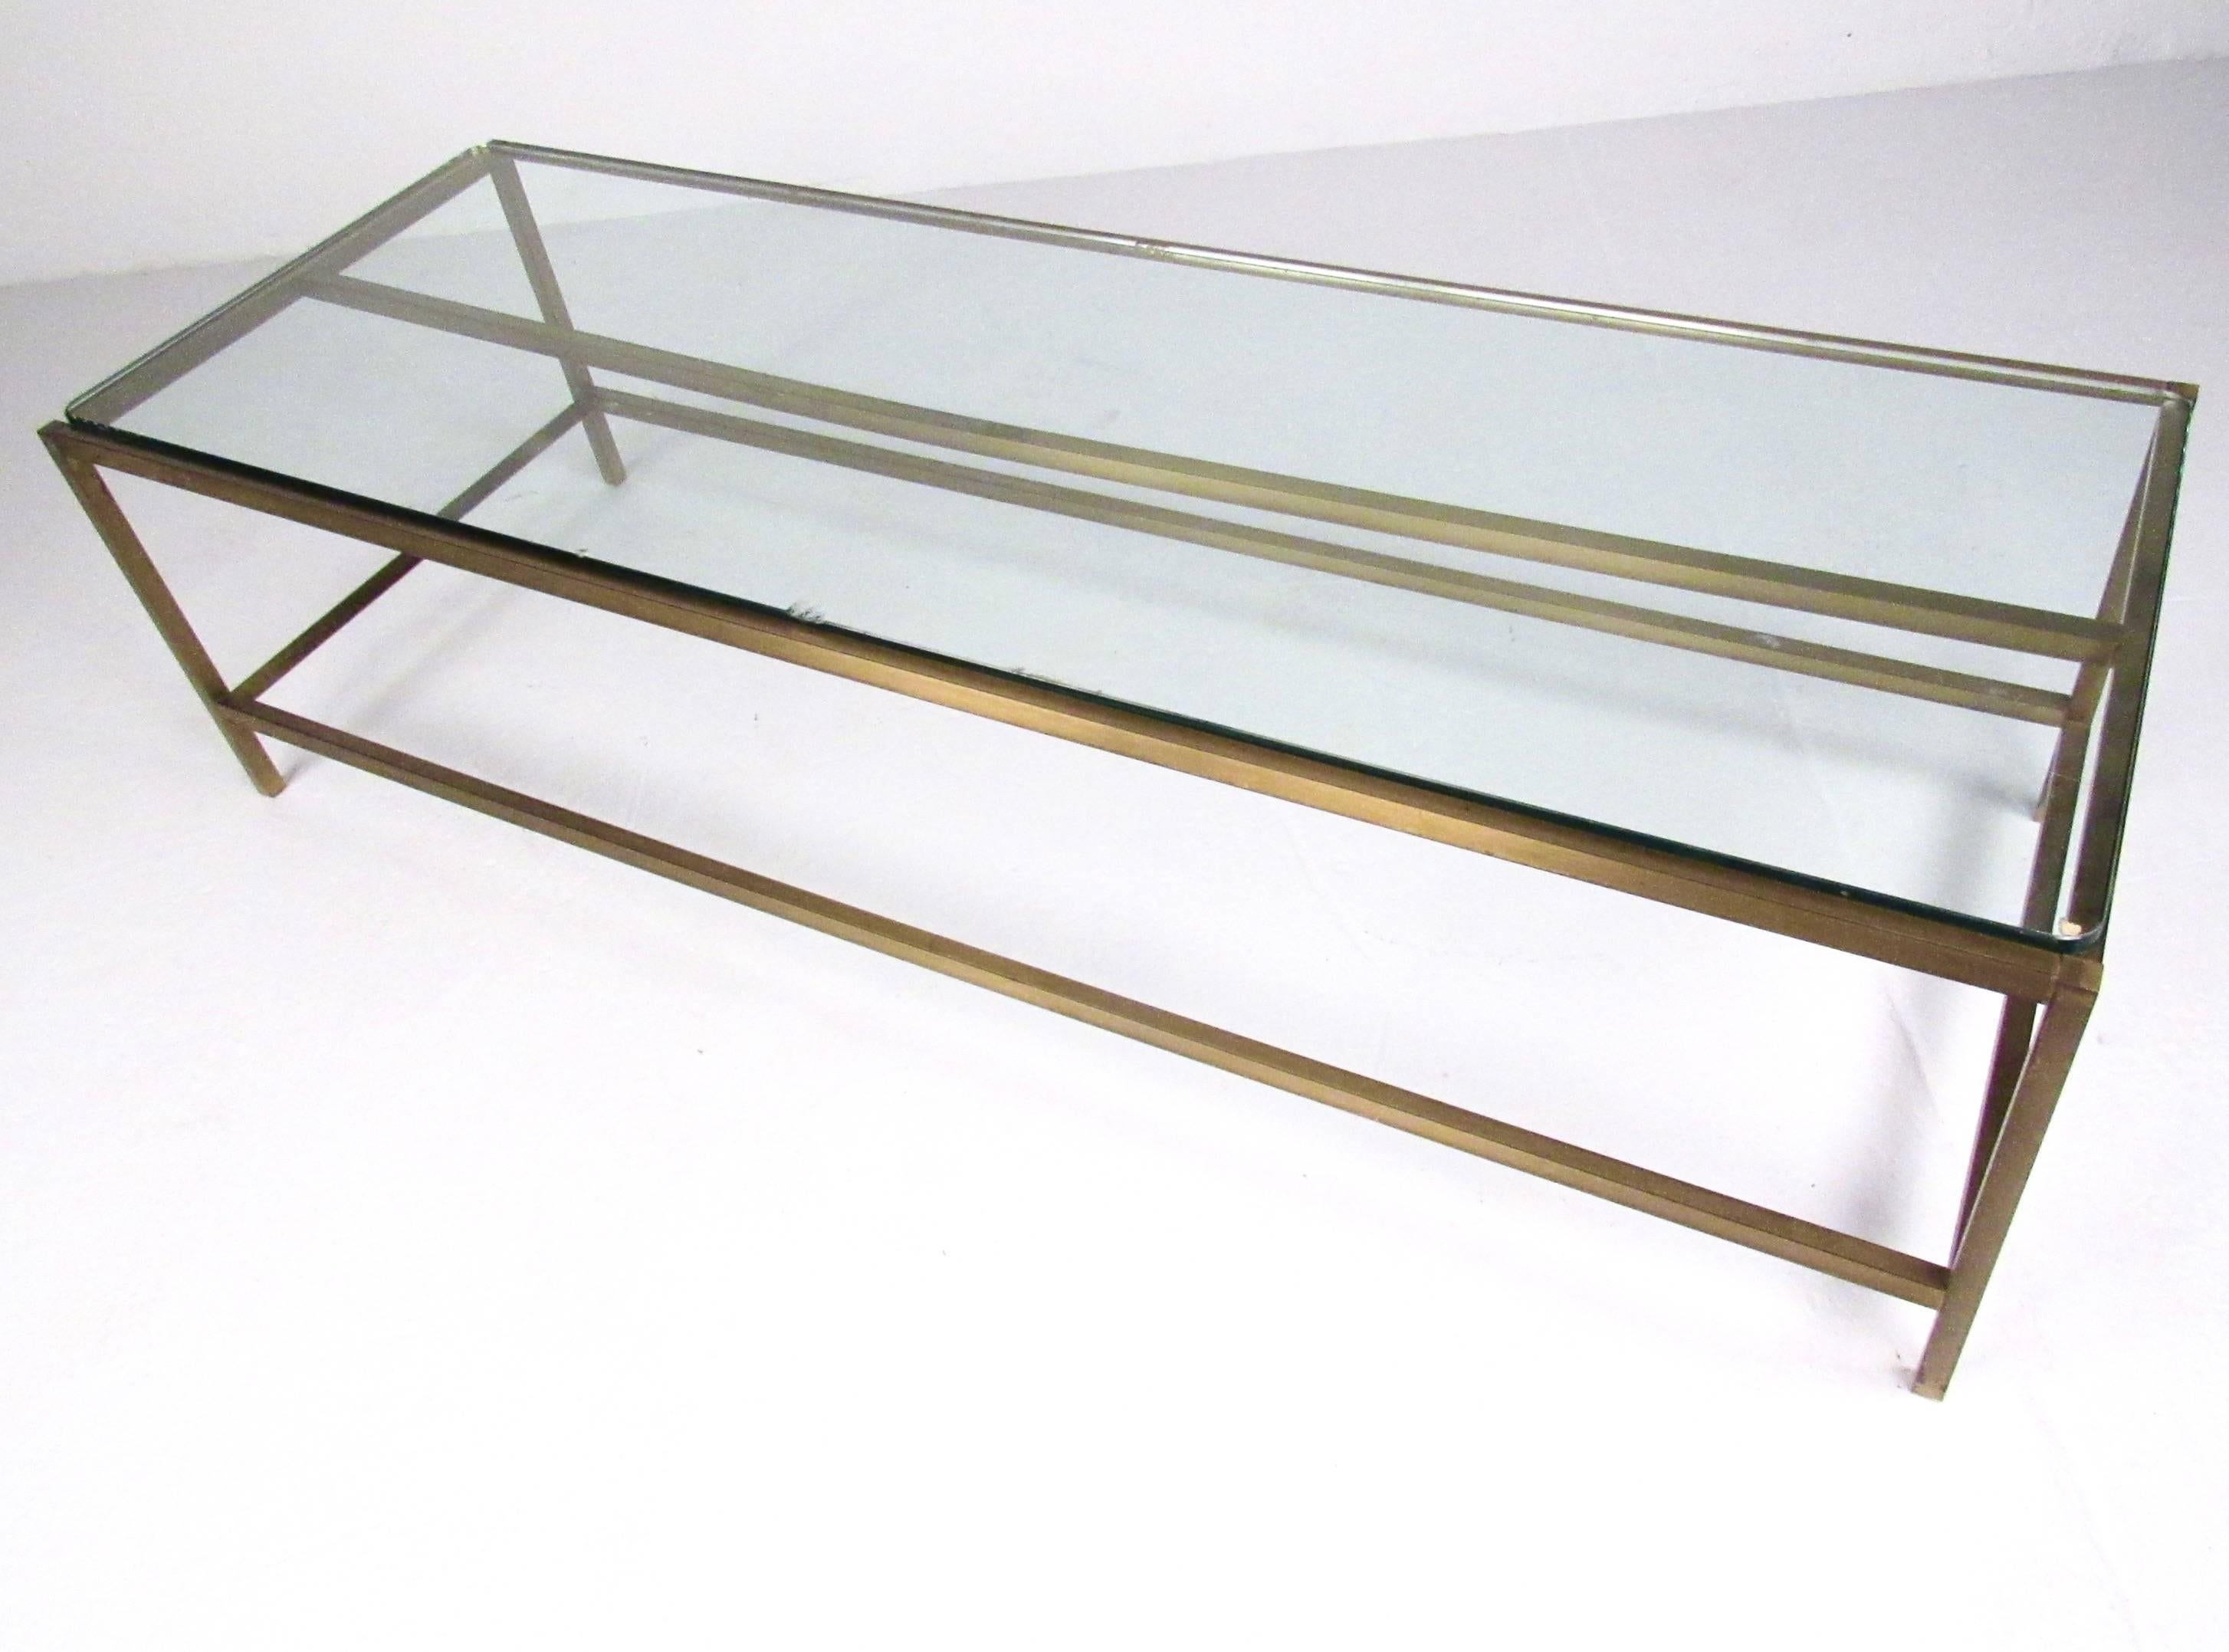 This impressive brass frame coffee table features a large rectangular frame with a unique patinated finish. Sturdy Mid-Century coffee table ideal for large seating areas and featuring the vintage design style of Harvey Probber. Please confirm item